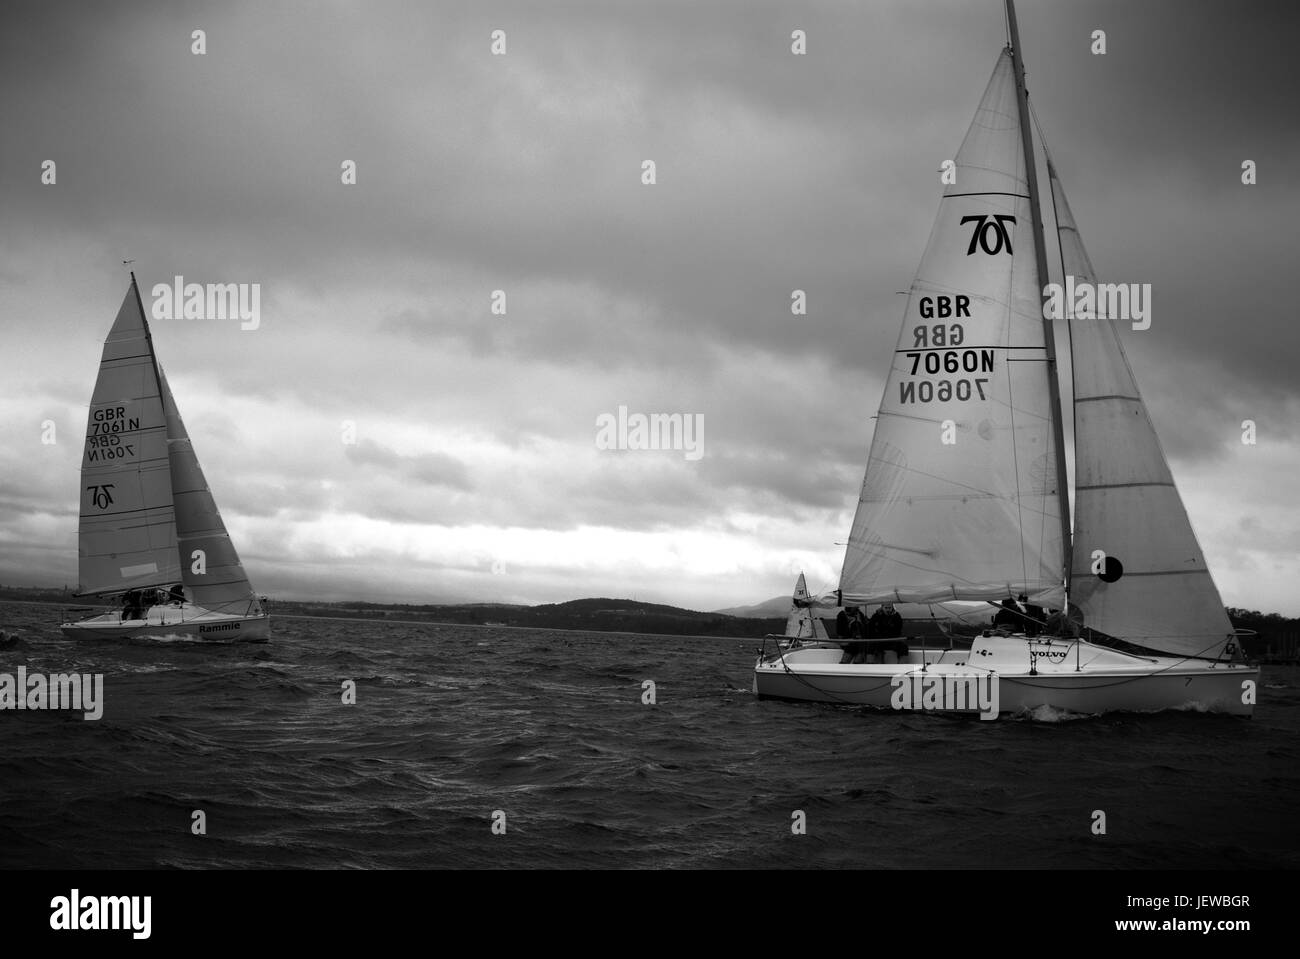 Sailing race, Firth of Forth, Scotland Stock Photo